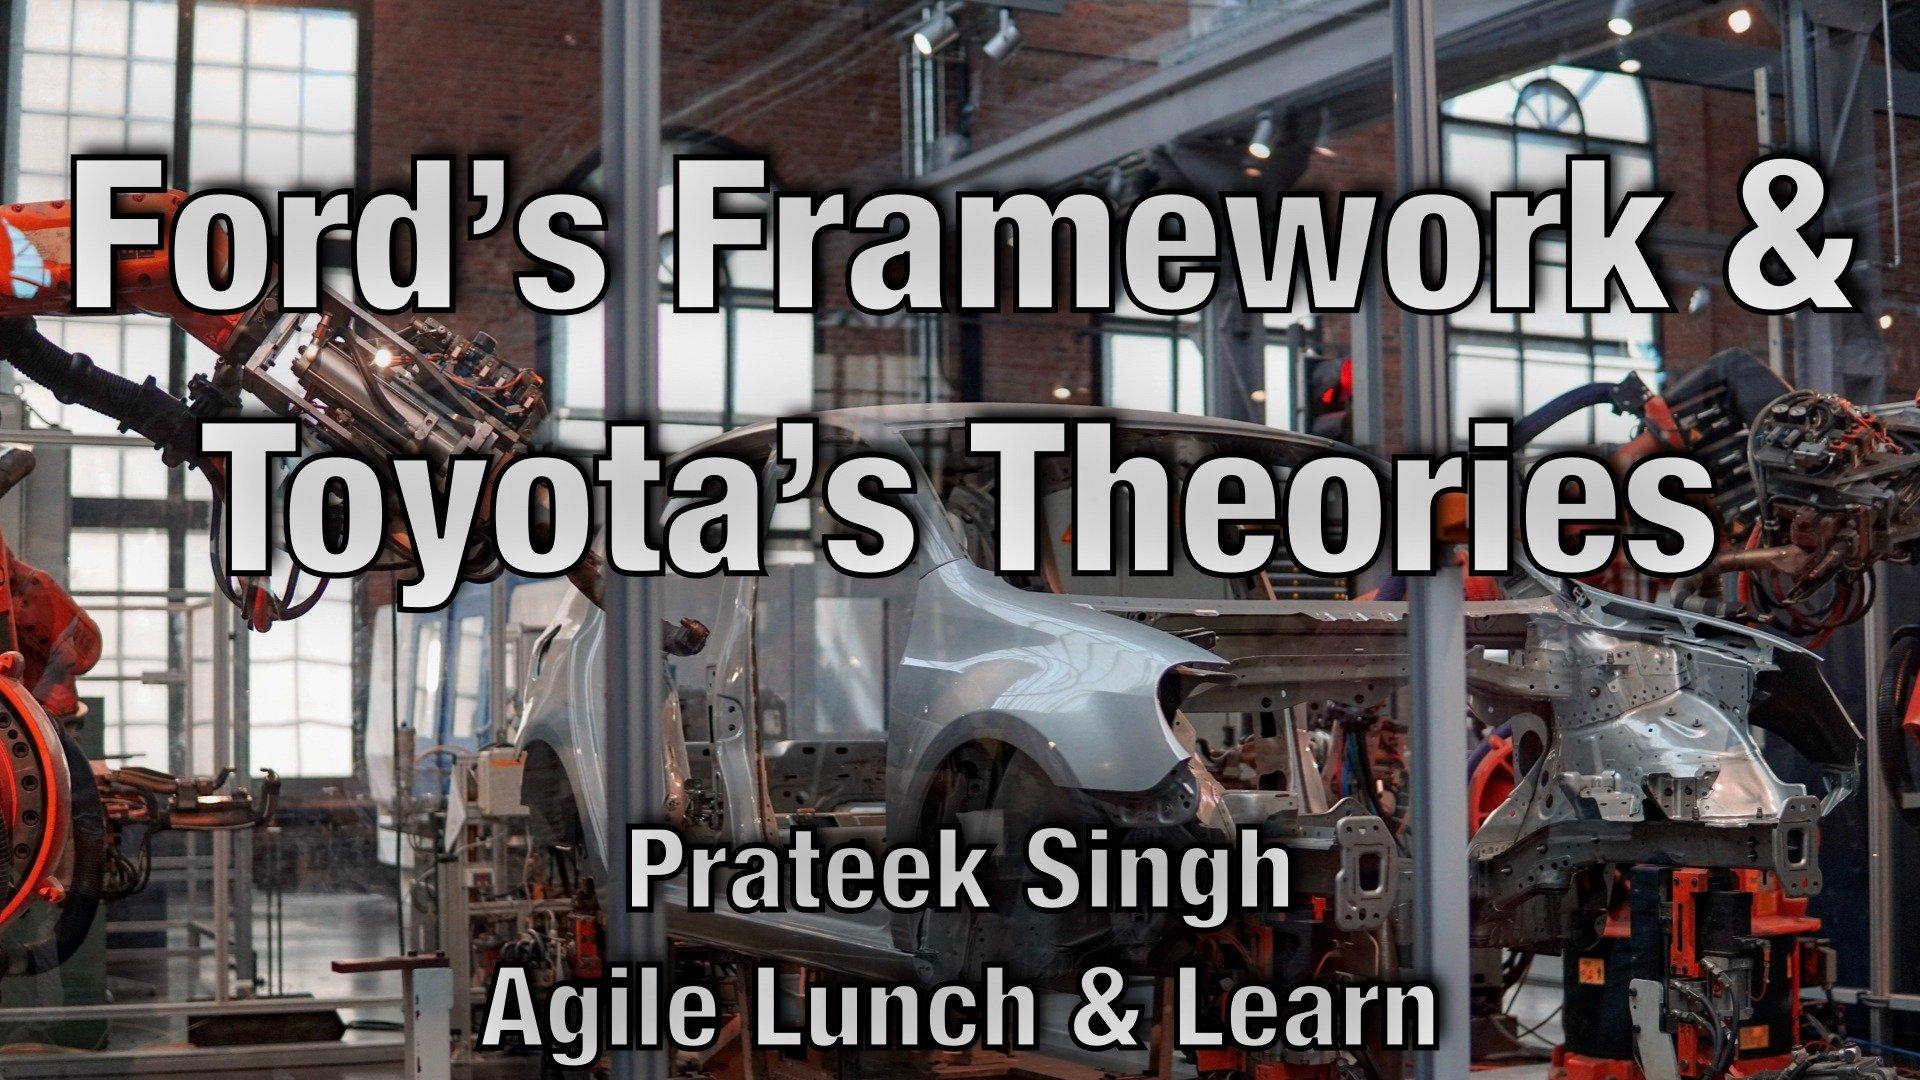  Ford's Frameworks and Toyota's Theories - Prateek Singh